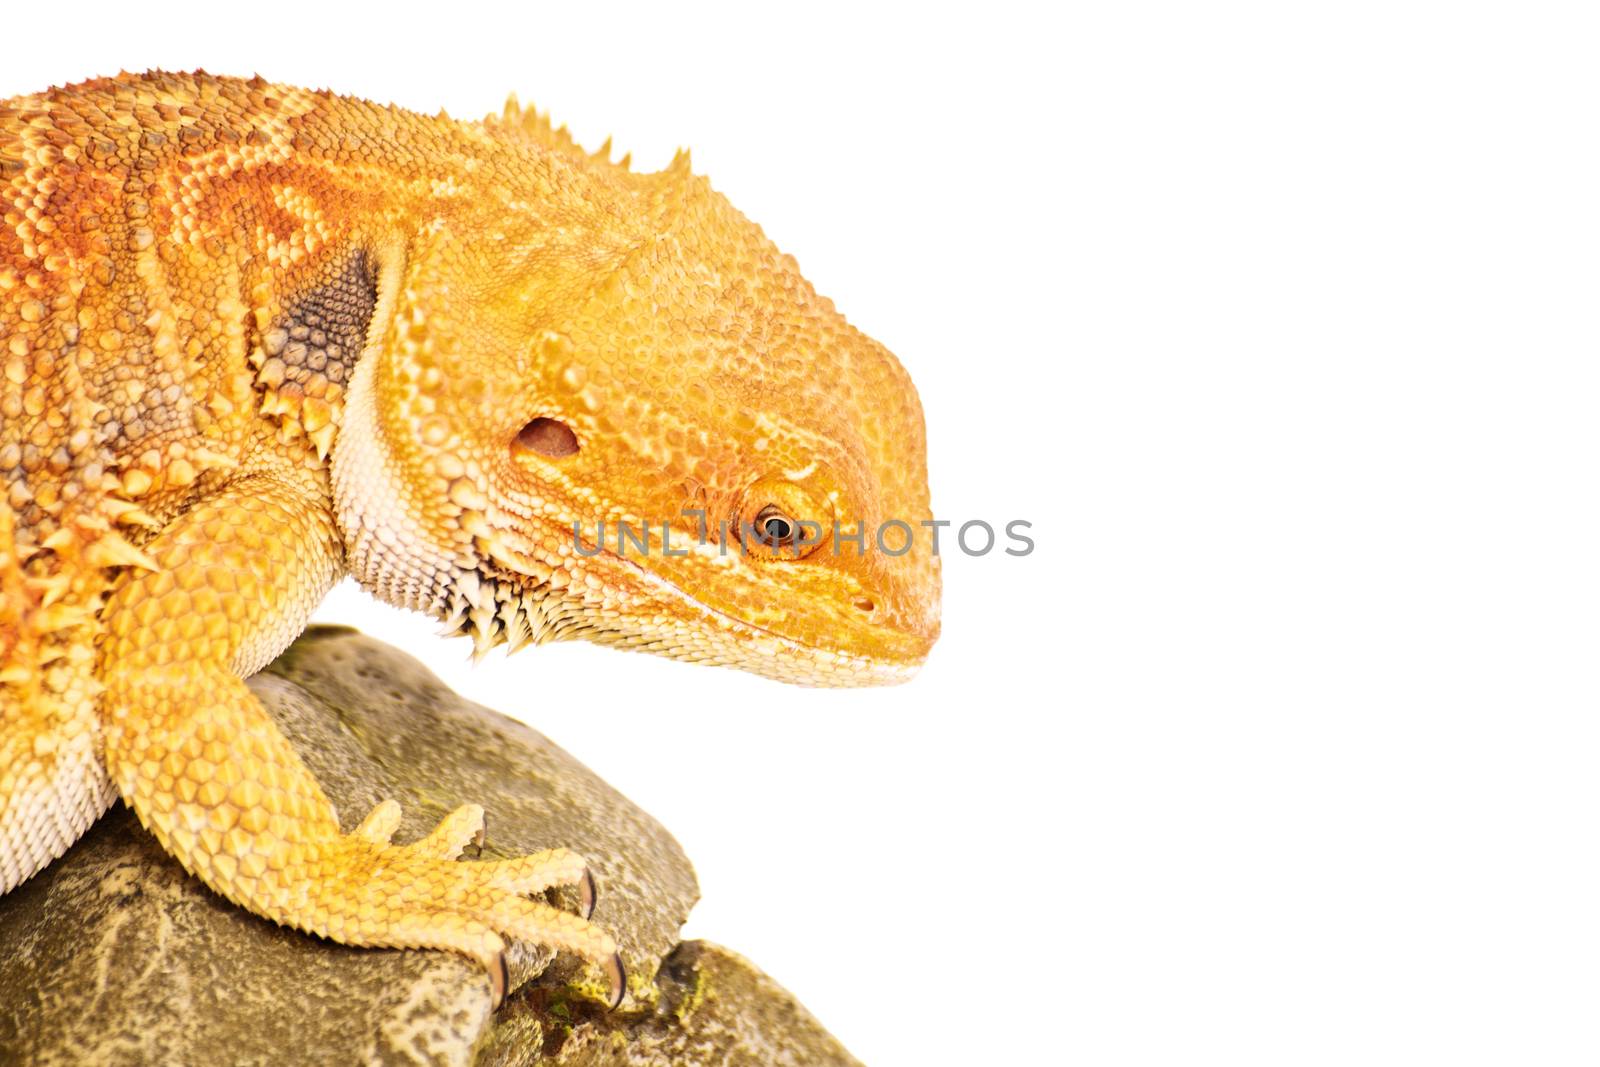 Bearded dragon standing on a rock, focused look, isolated on white background.